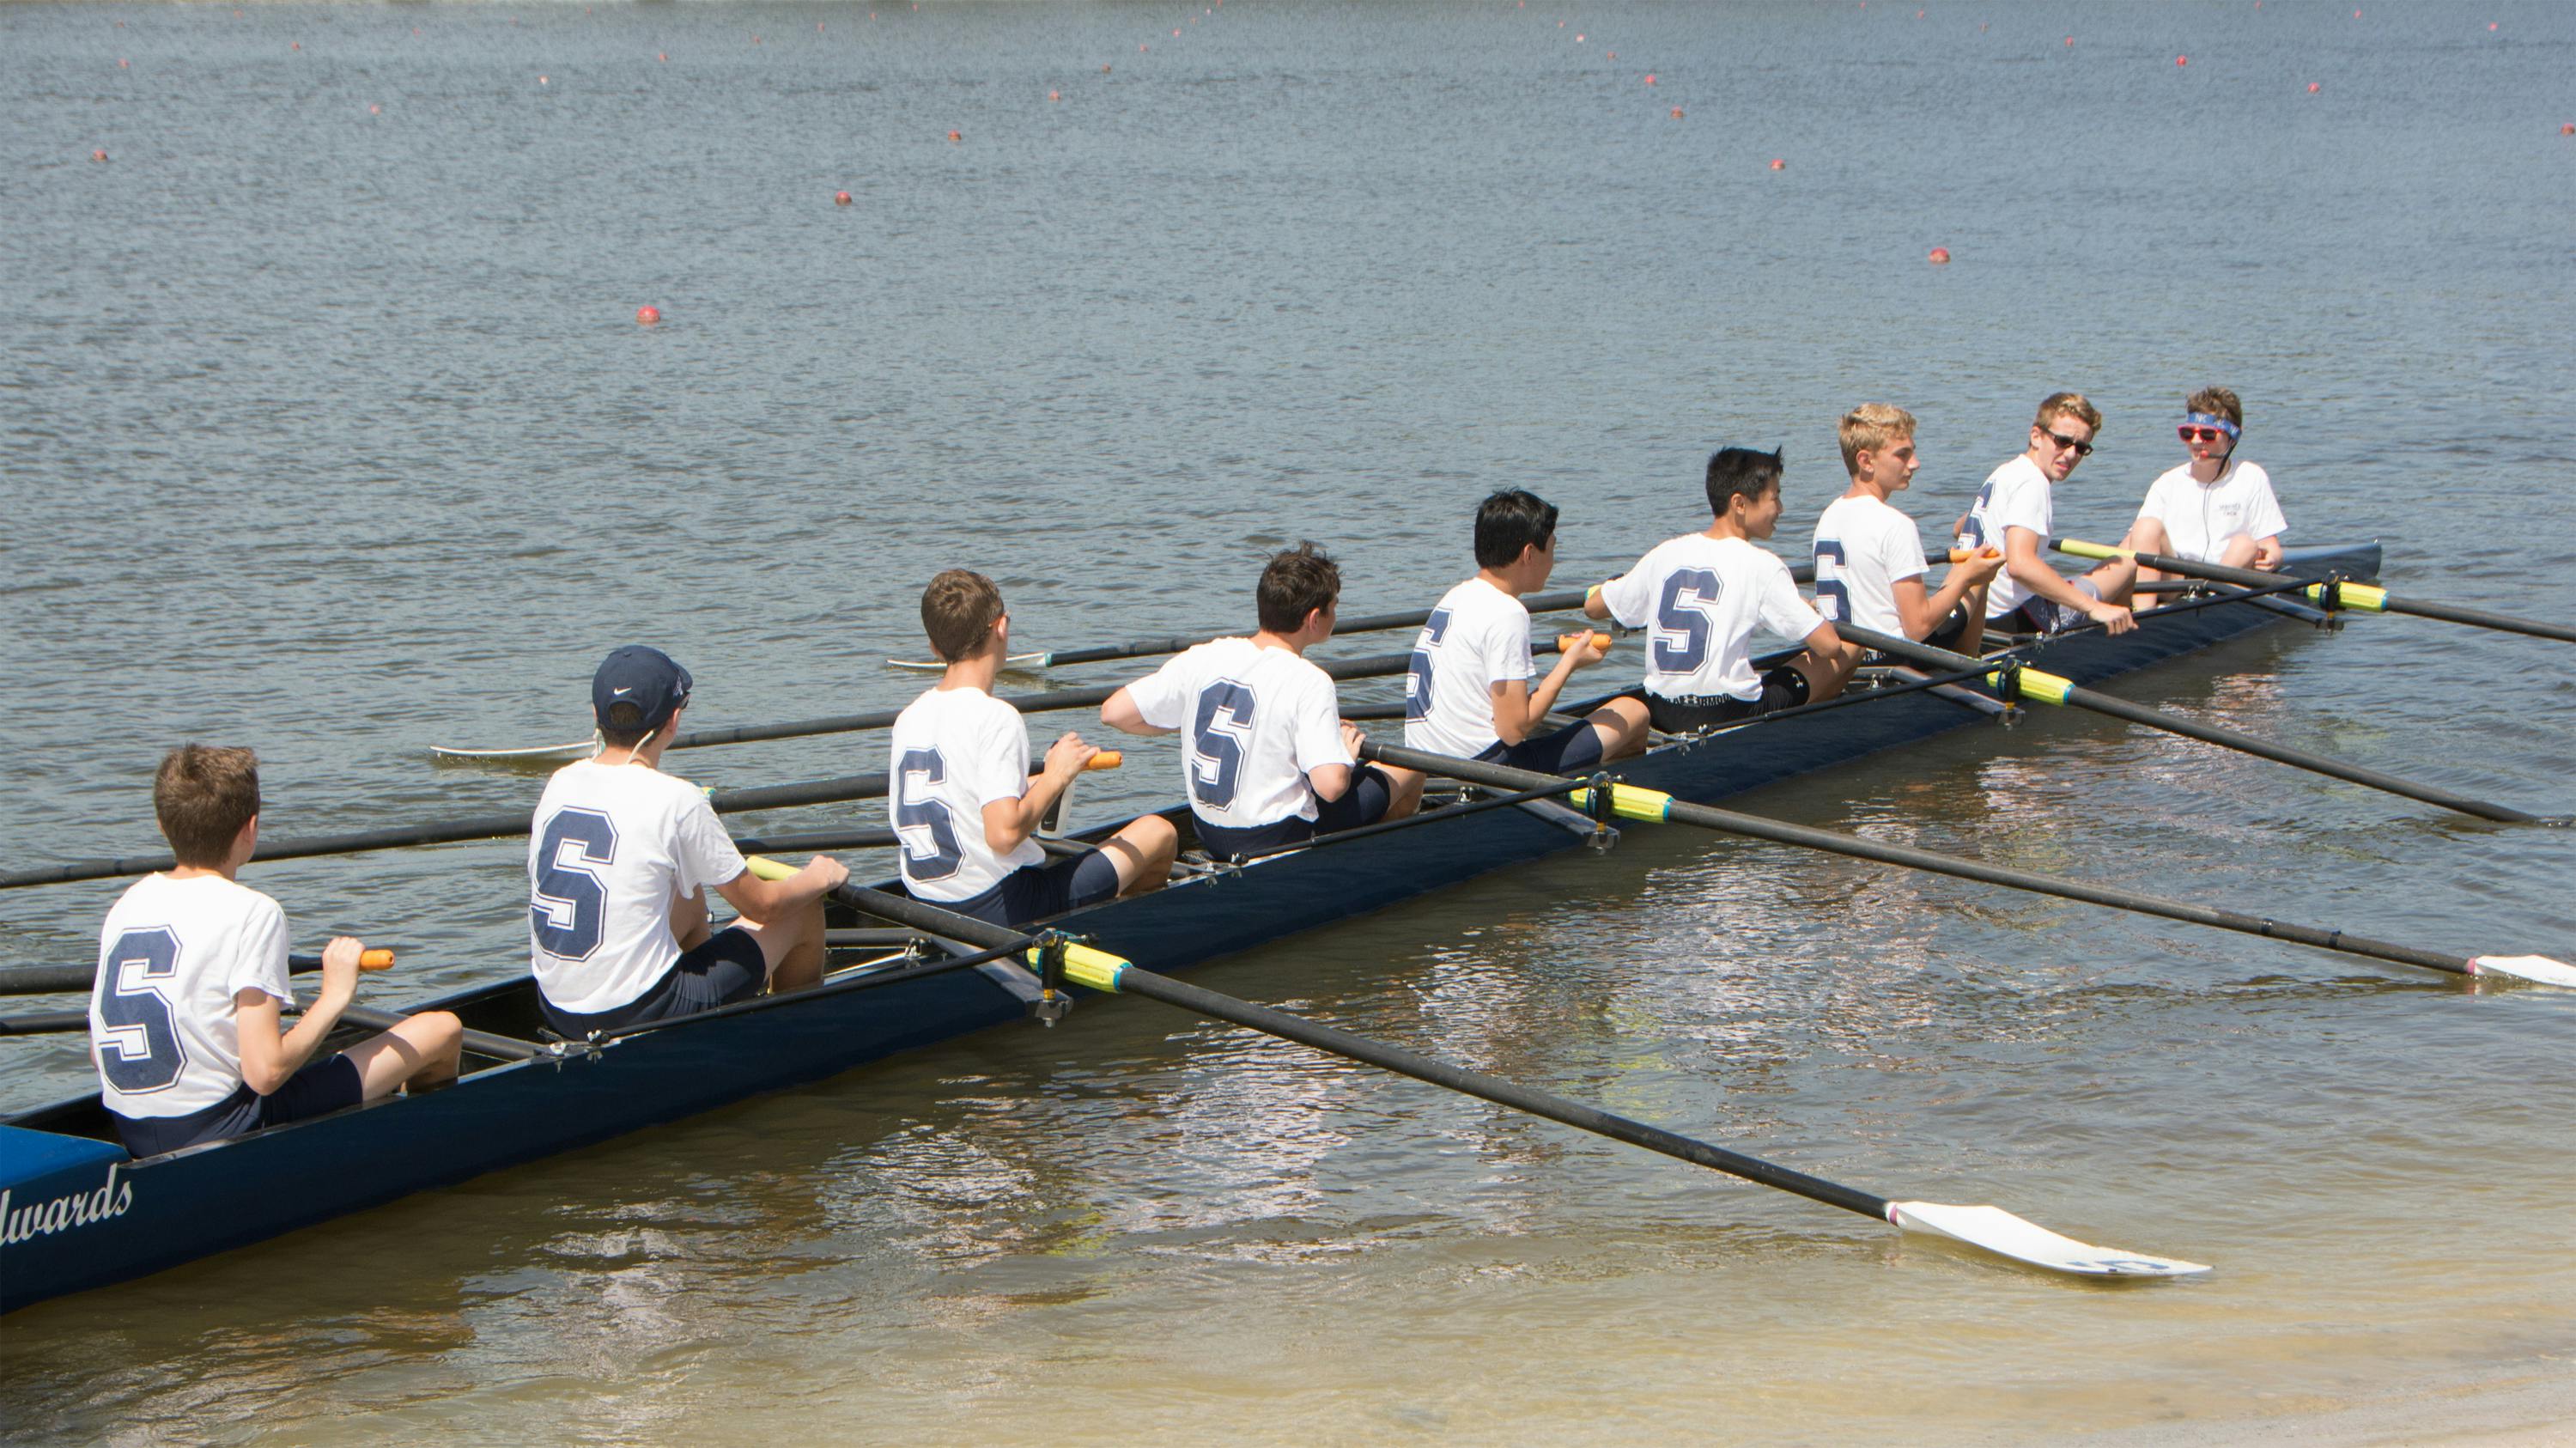 Free stock photo of Rowing competition